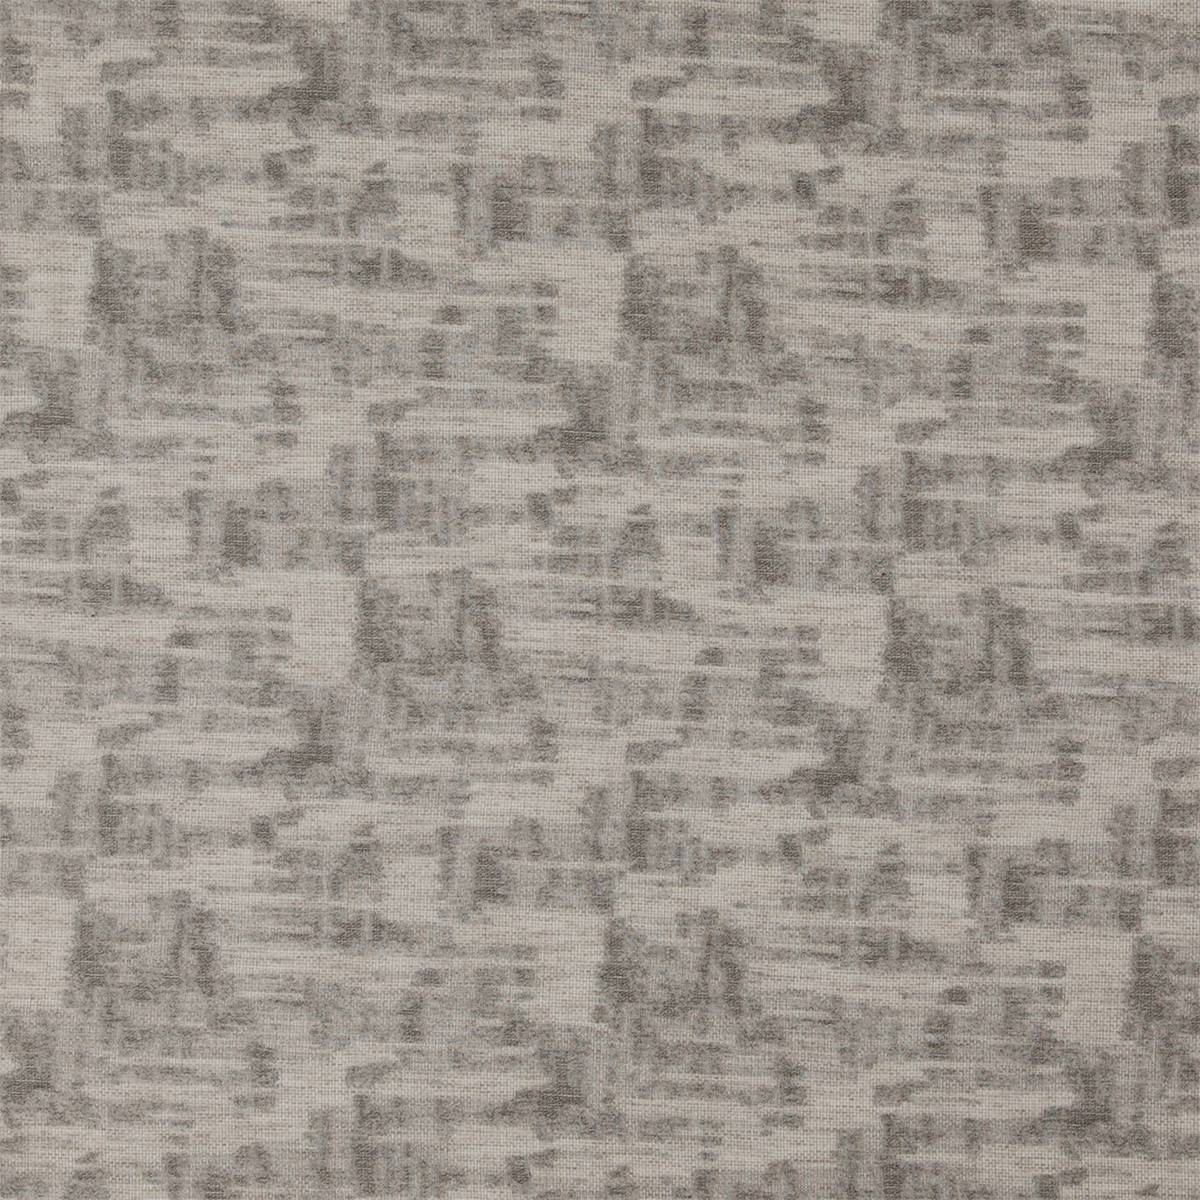 Refrain Griffin Fabric by Harlequin